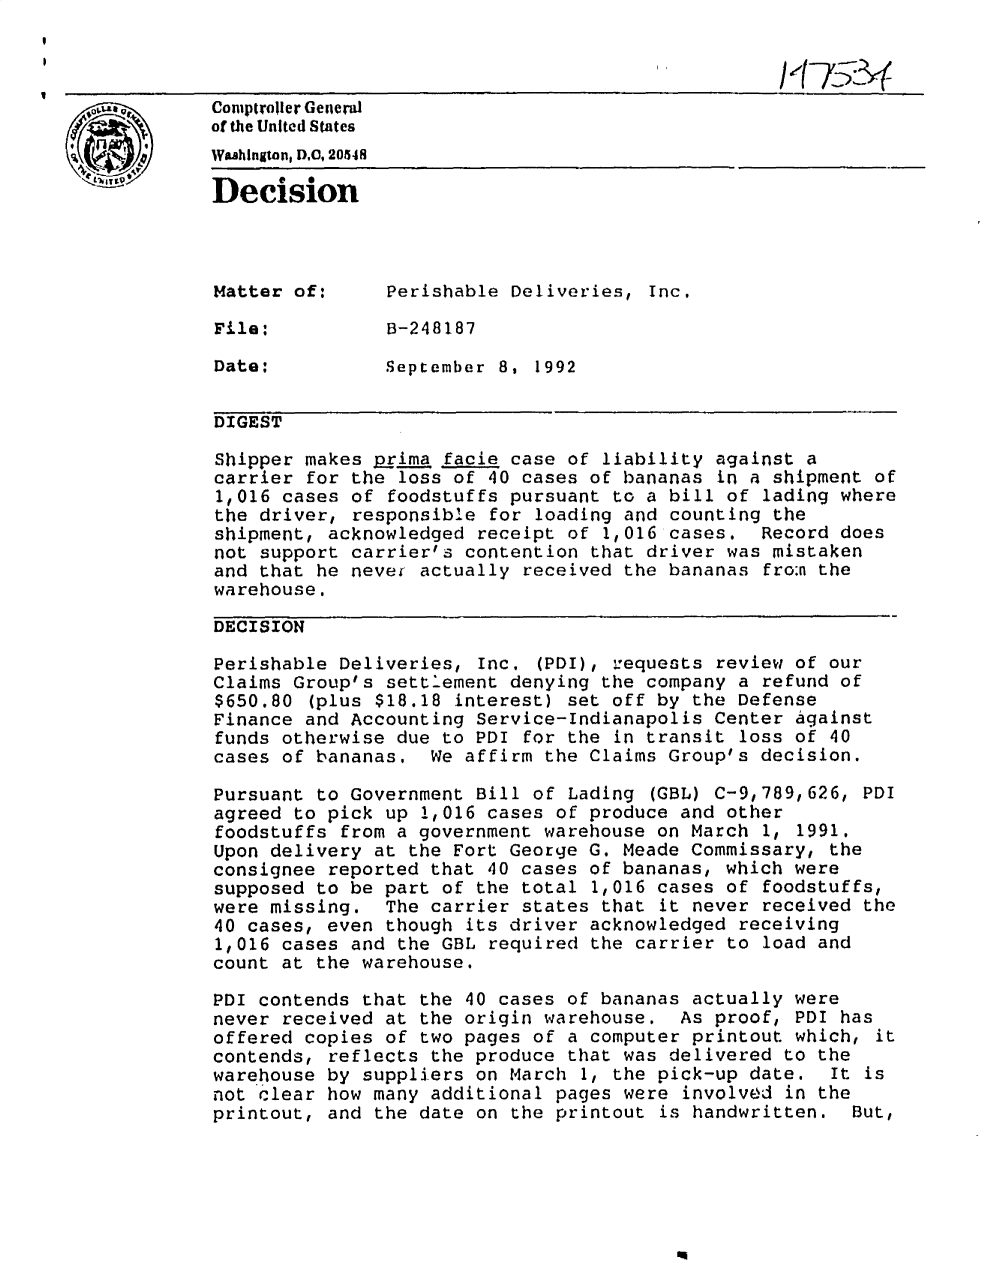 handle is hein.gao/gaobadodj0001 and id is 1 raw text is: 
I


               Comipiroiler General
               of the United States
               Wahlngton, D,C, 20548
               Decision




               Matter of:       Perishable Deliveries, Inc.

               File:            B-248187

               Date:            September 8, 1992


               DIGEST

               Shipper makes Prima facie case of liability against a
               carrier for the loss of 40 cases of bananas in a shipment of
               1,016 cases of foodstuffs pursuant to a bill of lading where
               the driver, responsible for loading and counting the
               shipment, acknowledged receipt of 1,016 cases. Record does
               not support carrier's contention that driver was mistaken
               and that he nevei actually received the bananas fro:n the
               warehouse.

               DECISION

               Perishable Deliveries, Inc. (PDI), iequests review of our
               Claims Group's settlement denying the company a refund of
               $650.80 (plus $18.18 interest) set off by the Defense
               Finance and Accounting Service-Indianapolis Center against
               funds otherwise due to PDI for the in transit loss of 40
               cases of bananas, We affirm the Claims Group's decision.

               Pursuant to Government Bill of Lading (GBL) C-9,789,626, PDI
               agreed to pick up 1,016 cases of produce and other
               foodstuffs from a government warehouse on March 1, 1991.
               Upon delivery at the Fort George G. Meade Commissary, the
               consignee reported that 40 cases of bananas, which were
               supposed to be part of the total 1,016 cases of foodstuffs,
               were missing. The carrier states that it never received the
               40 cases, even though its driver acknowledged receiving
               1,016 cases and the GBL required the carrier to load and
               count at the warehouse.

               PDI contends that the 40 cases of bananas actually were
               never received at the origin warehouse. As proof, PDI has
               offered copies of two pages of a computer printout which, it
               contends, reflects the produce that was delivered to the
               warehouse by suppliers on March 1, the pick-up date. It is
               not clear how many additional pages were involved in the
               printout, and the date on the printout is handwritten. But,


